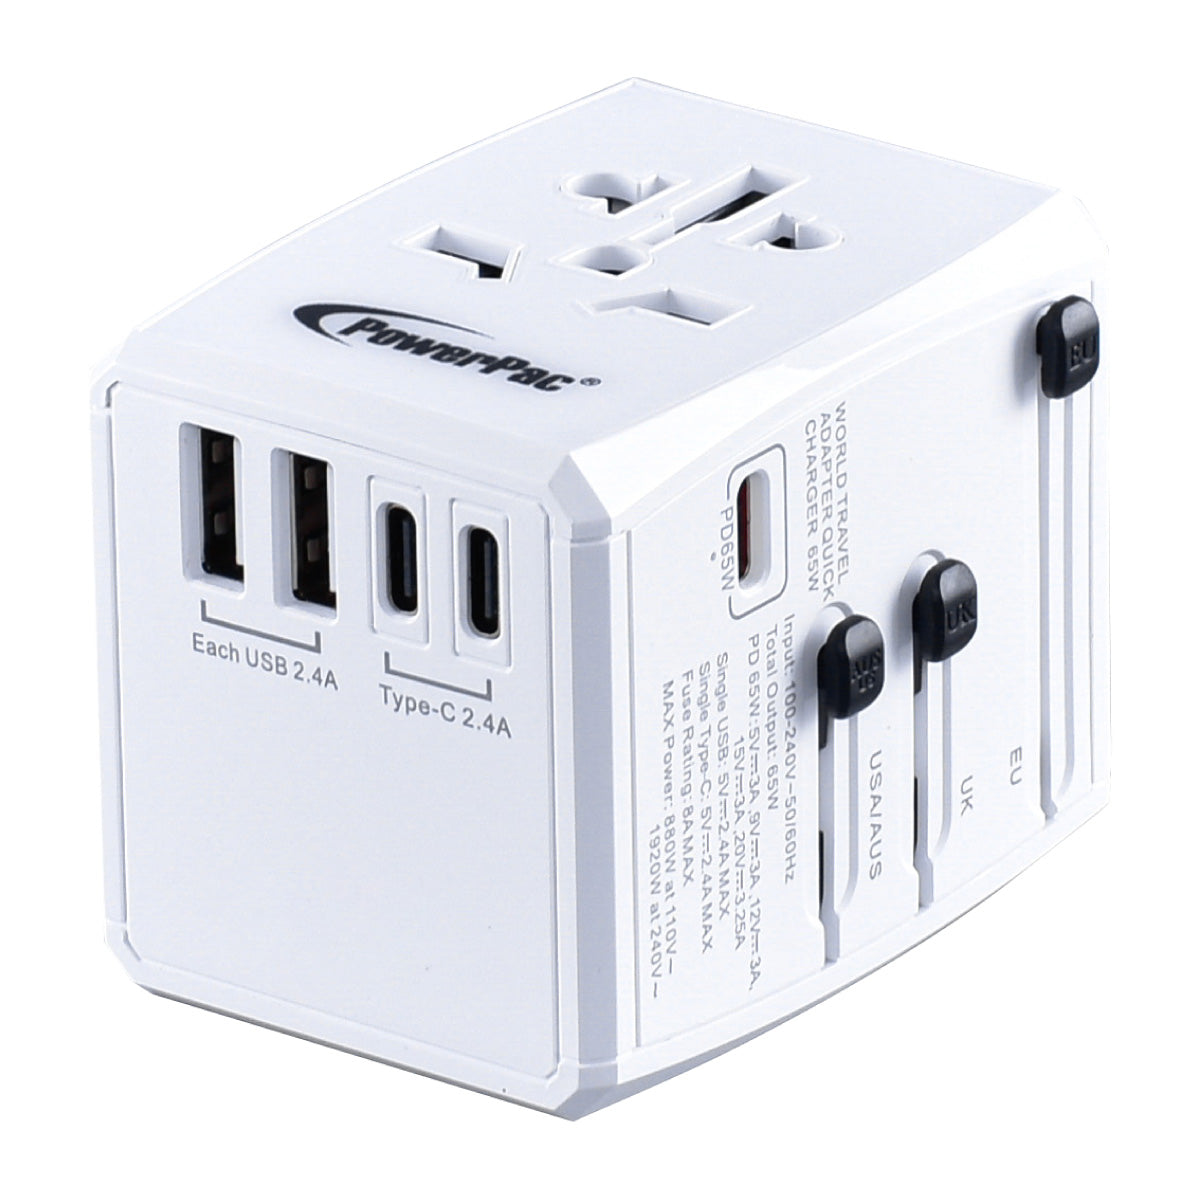 PowerPac Multi Travel Adapter With 2x USB-A + 3x USB-C Charger | PD 65W USB Charger (PP7977)